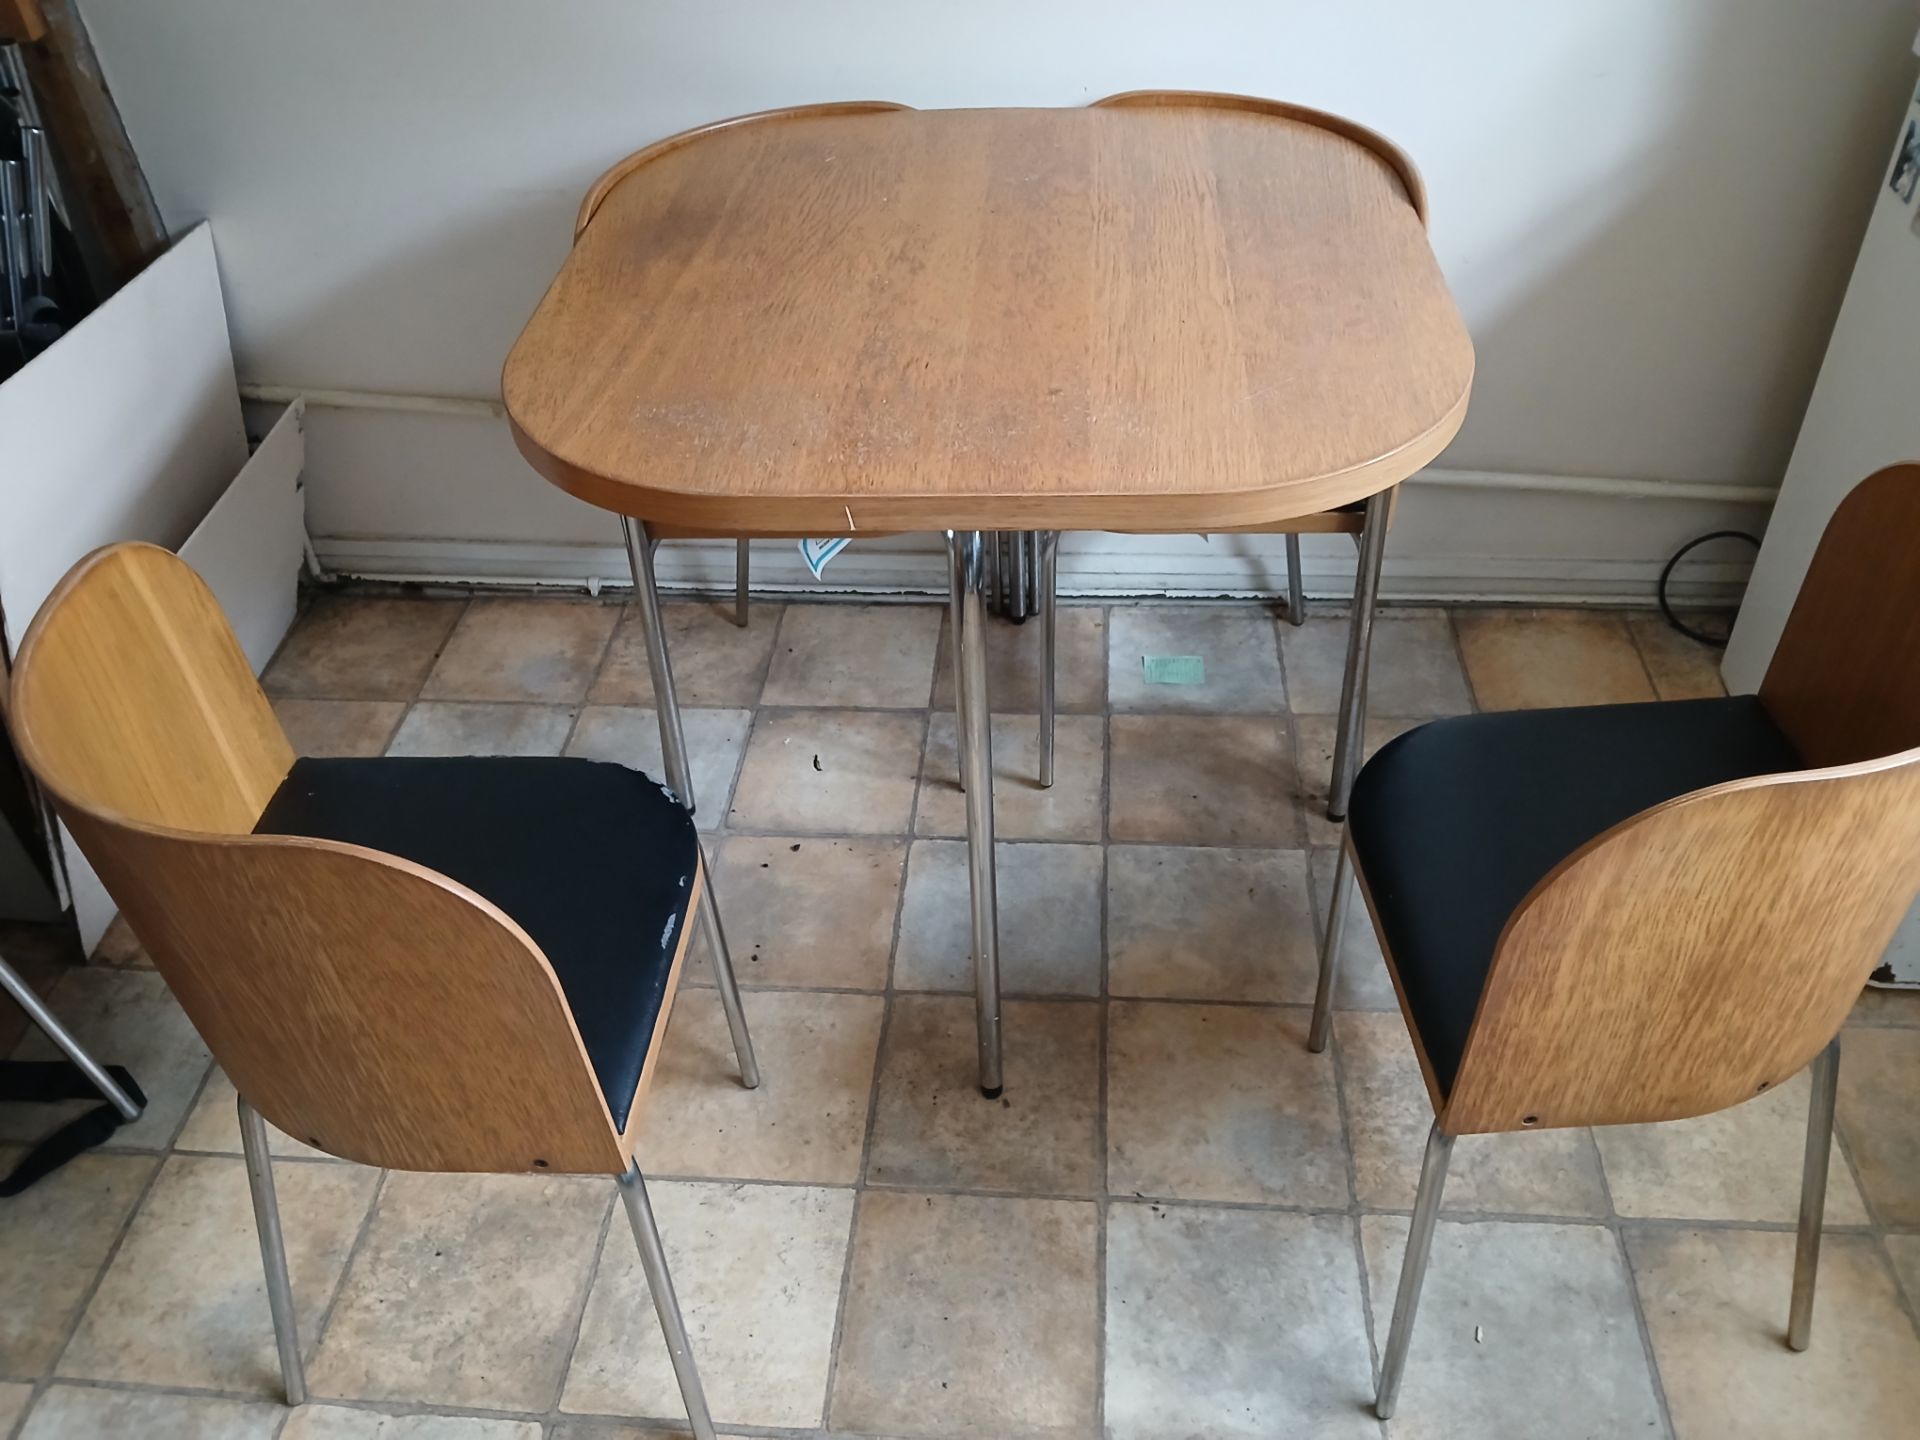 Shaped Table, with 4 x Chairs - Image 2 of 4